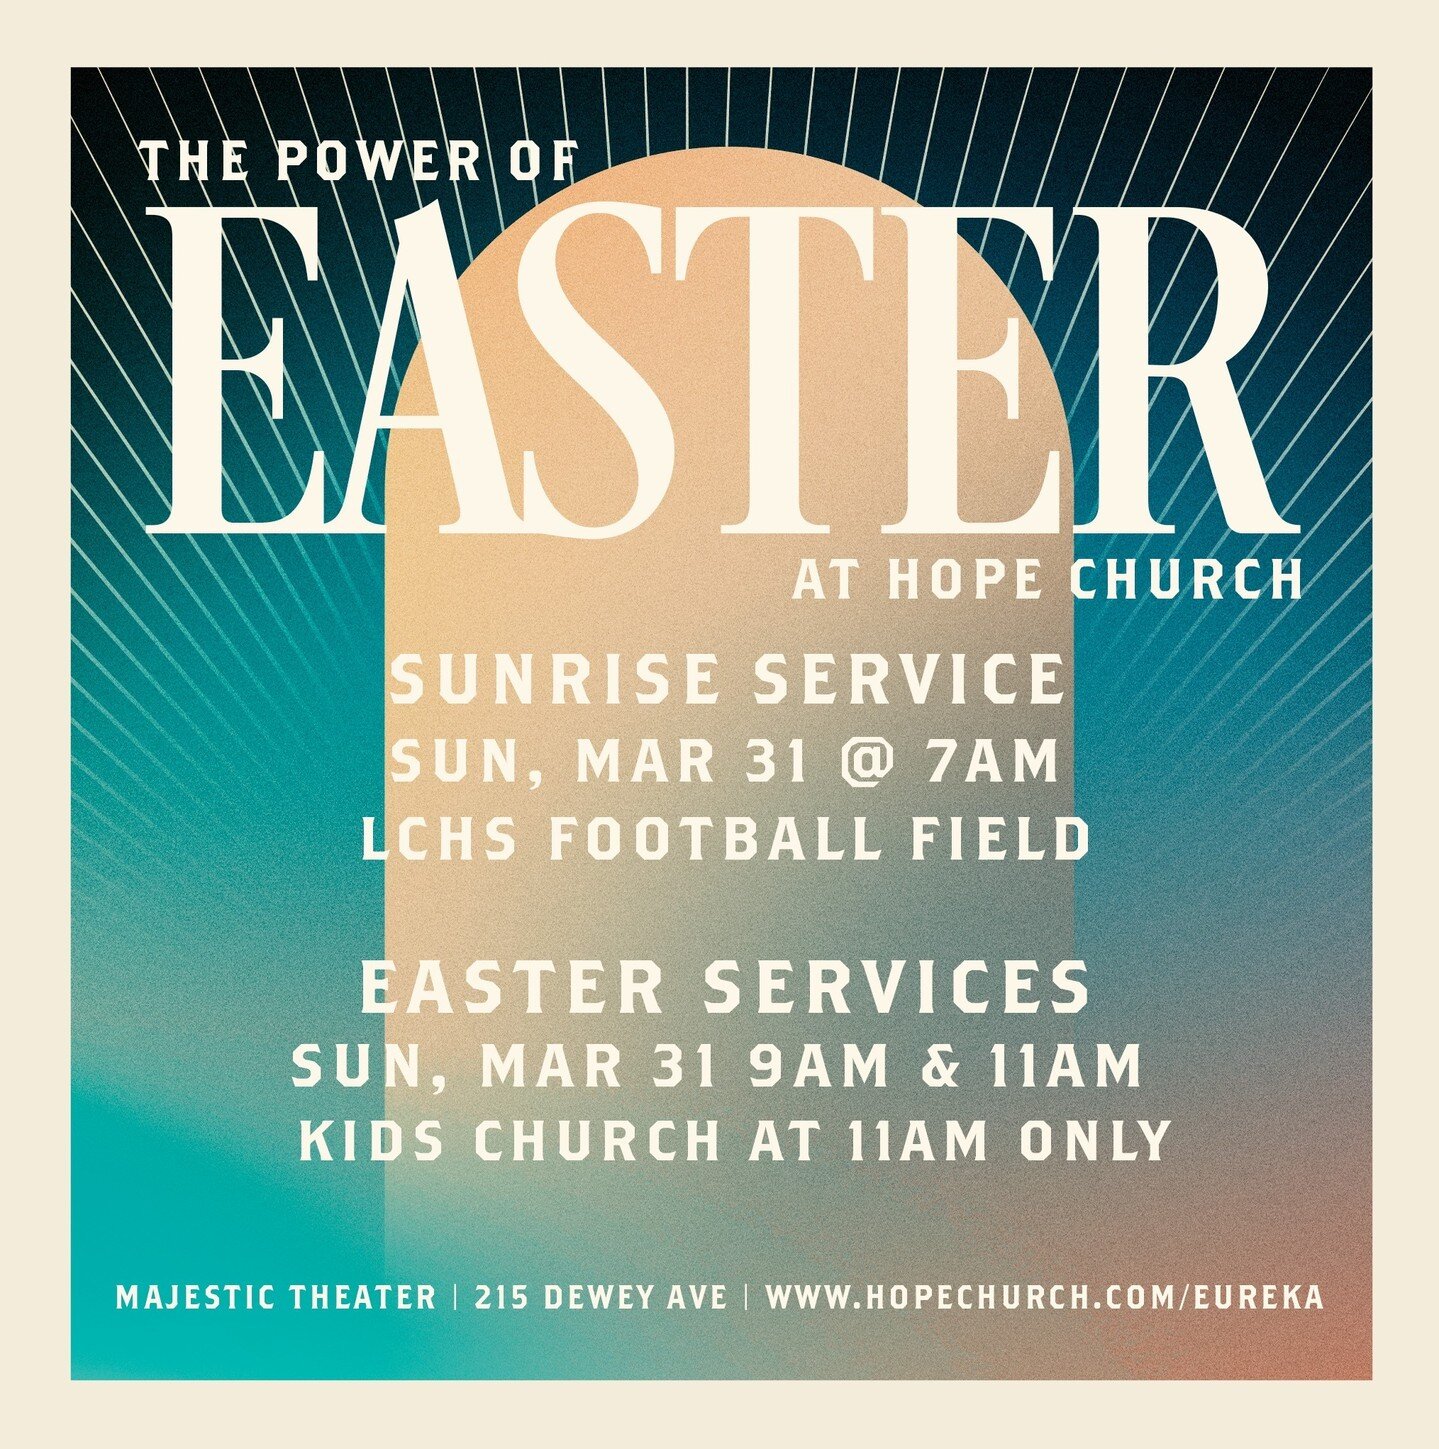 You're invited to join us as we celebrate the greatest day in history! Join us and surrounding churches for the annual Sunrise Service at LCHS at 7am and after that bring your family to our Easter Service at Hope Church. We meet at the Majestic Theat